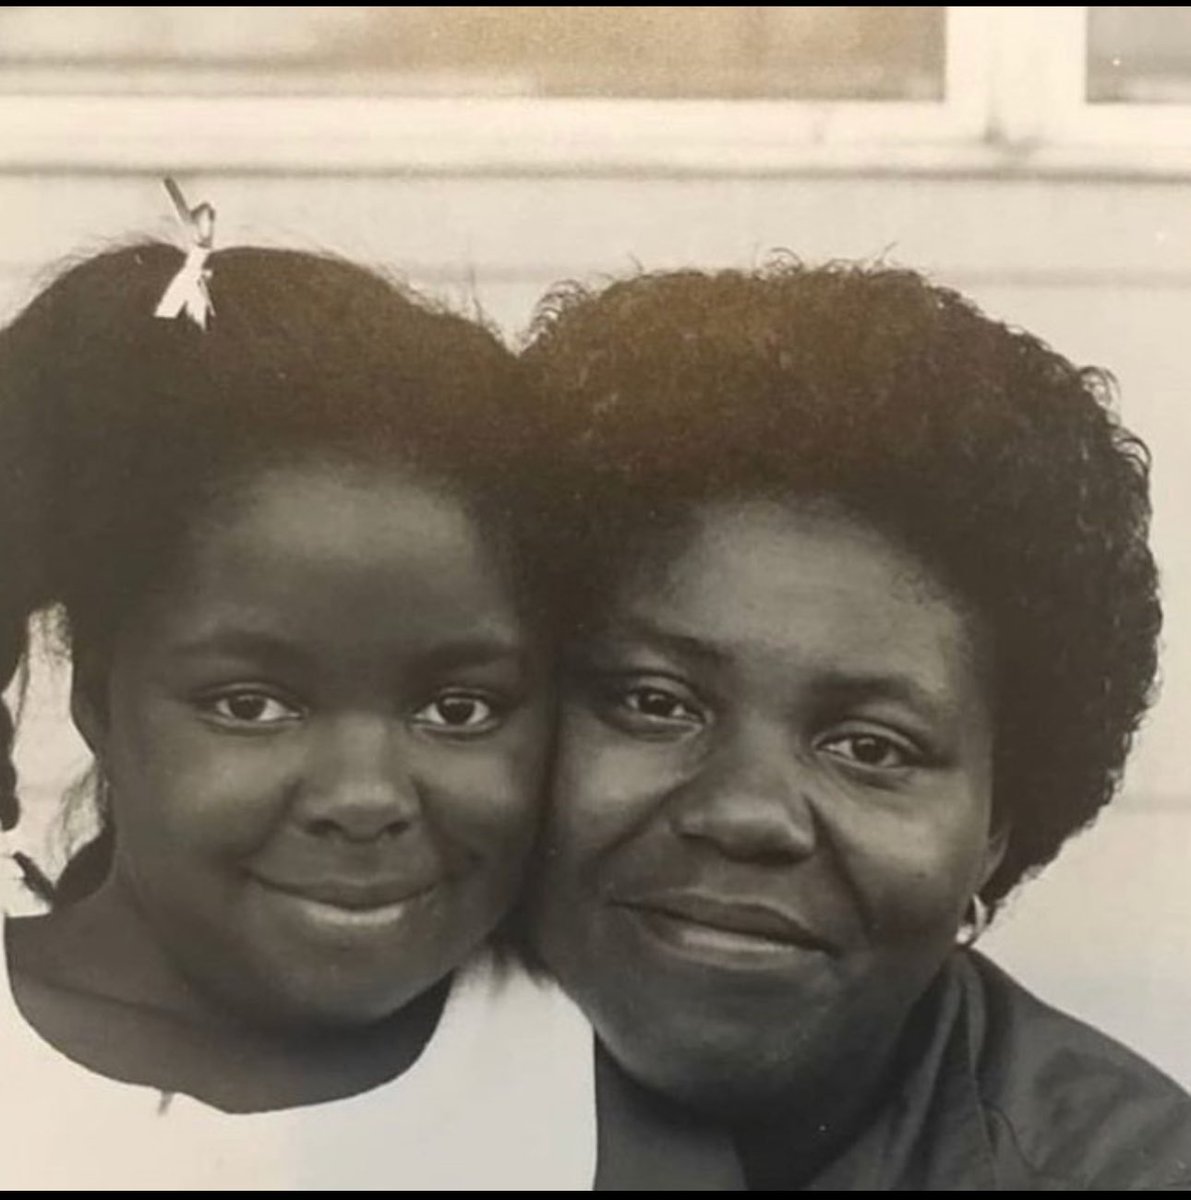 Happy Mother’s Day to my ride or die, AKA, ‘my mom’. She always keeps me on track with mini sermons, and life tips for keeping strong on the journey. I am because of her. #throwbackpic #mothersday🌸 #westtexastaughtme